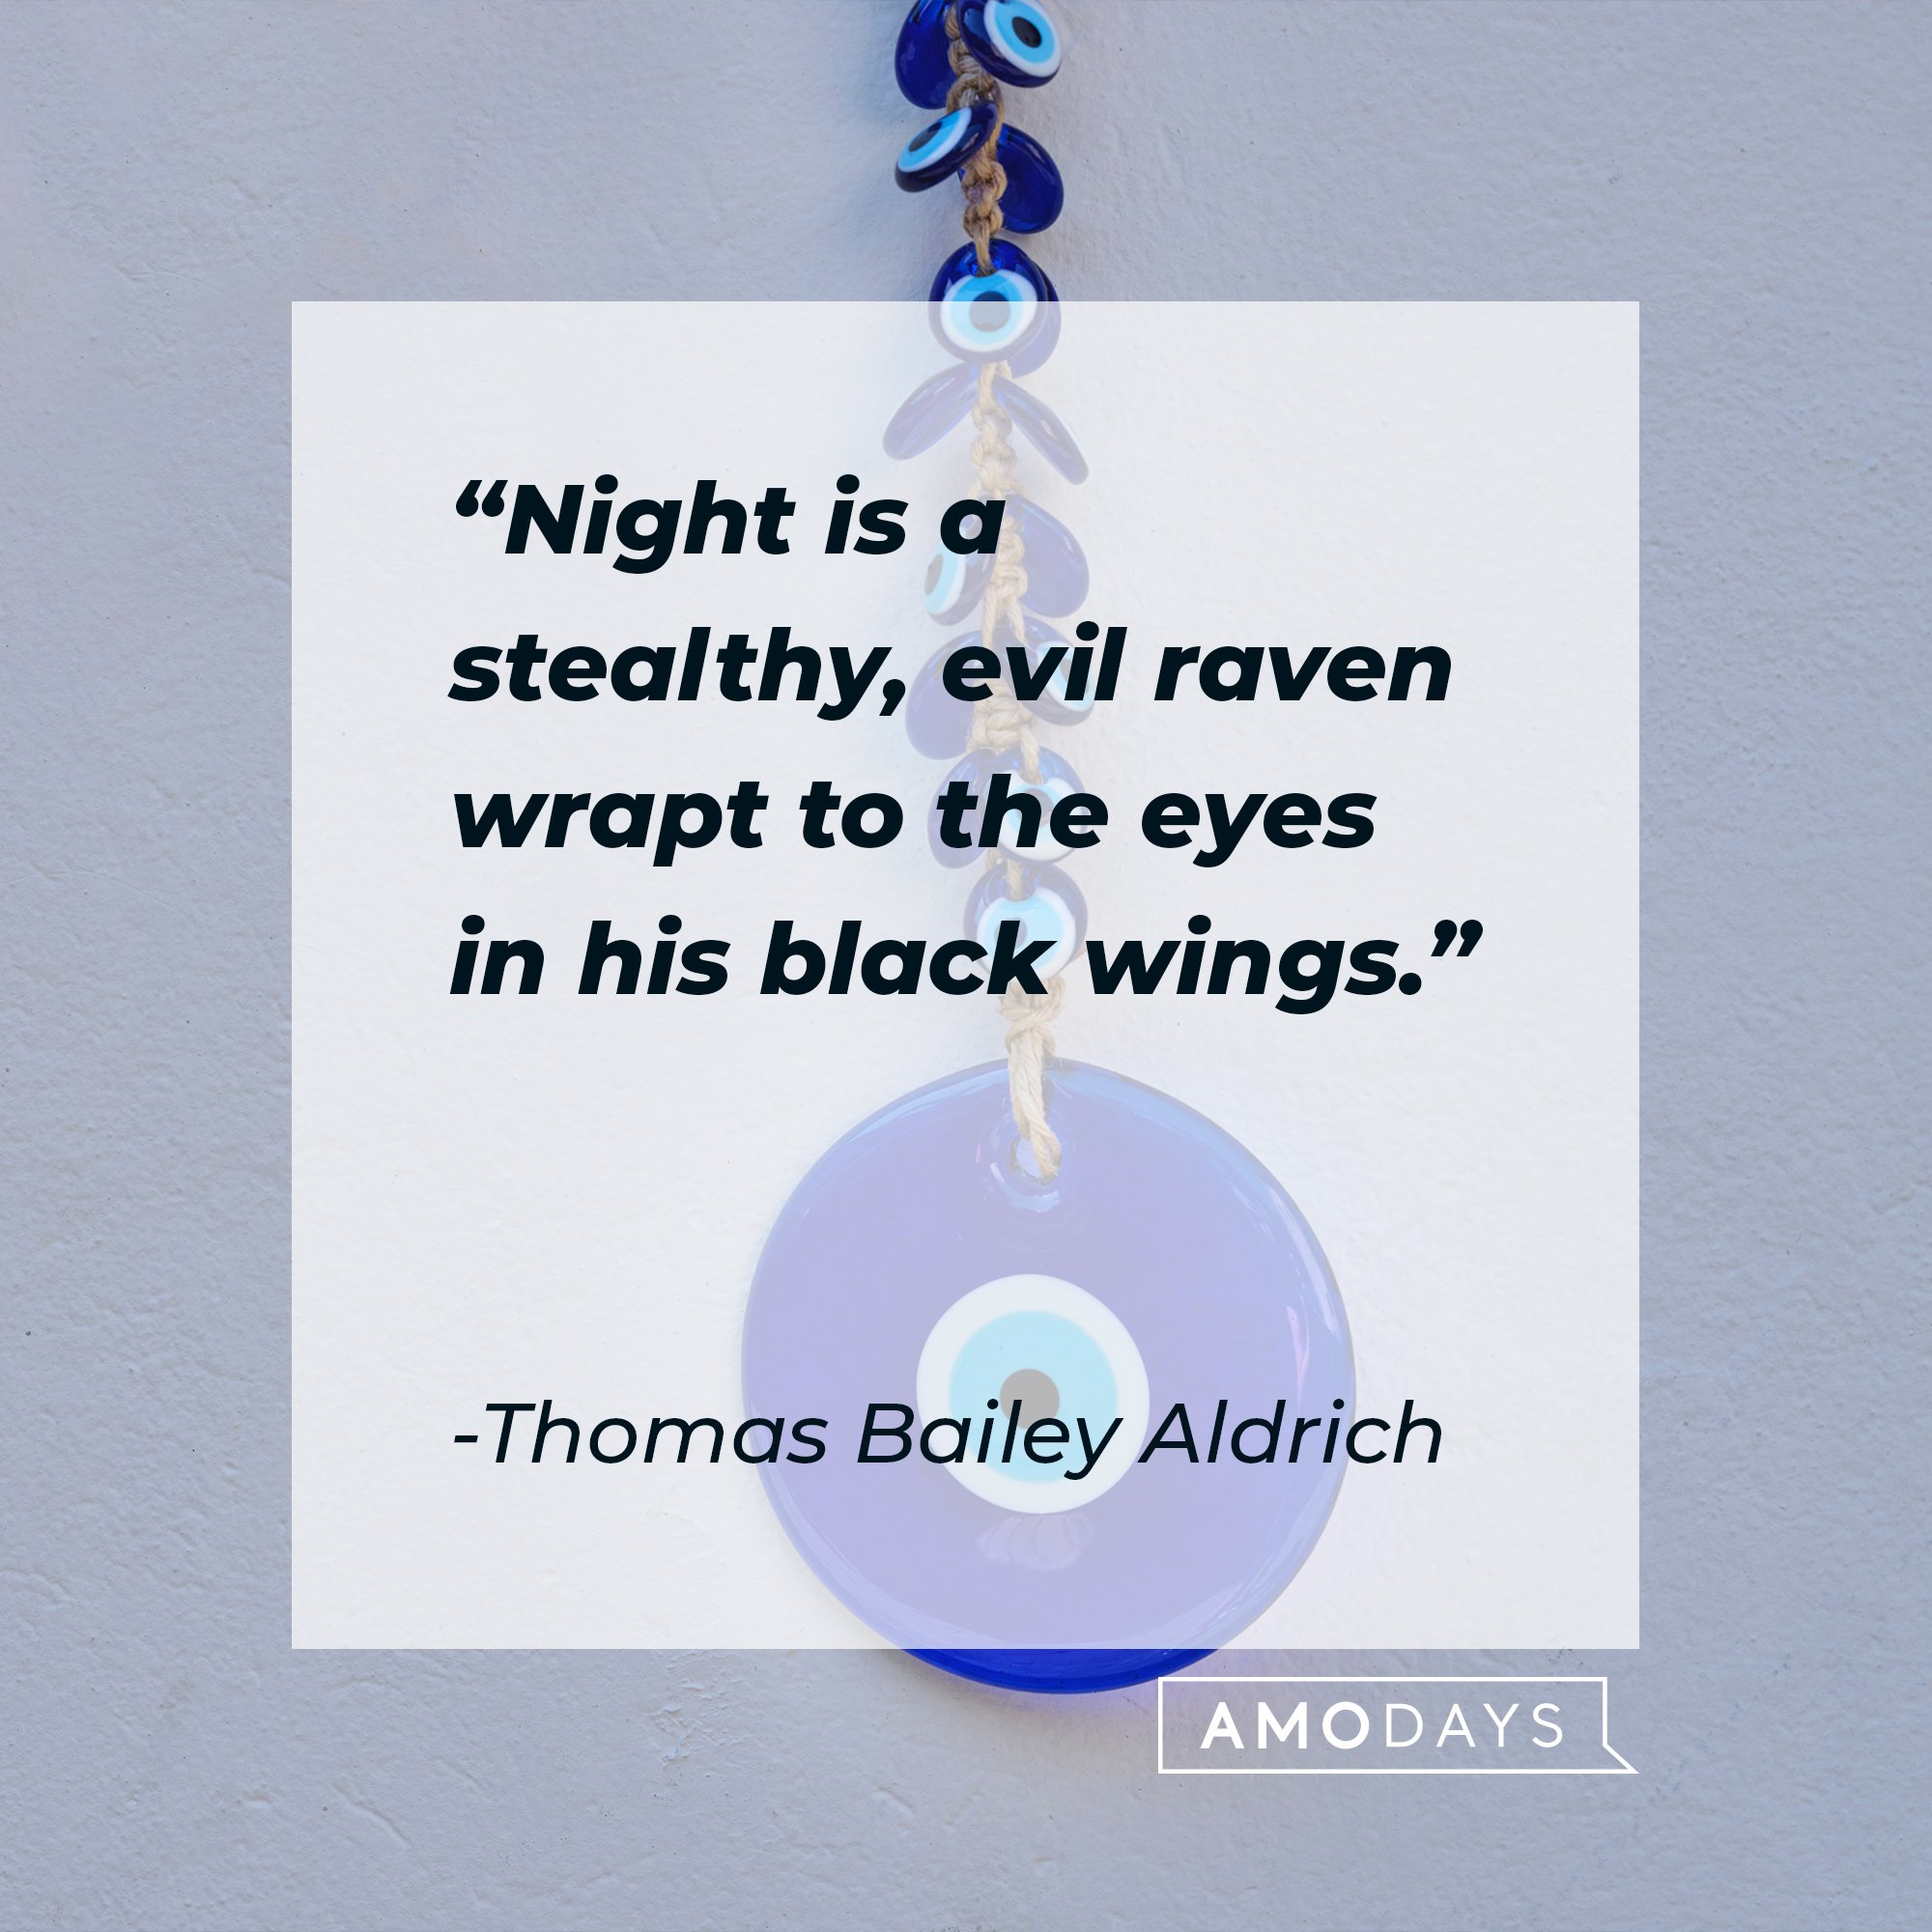  Thomas Bailey Aldrich’s quote: "Night is a stealthy, evil raven wrapt to the eyes in his black wings." | Image: AmoDays